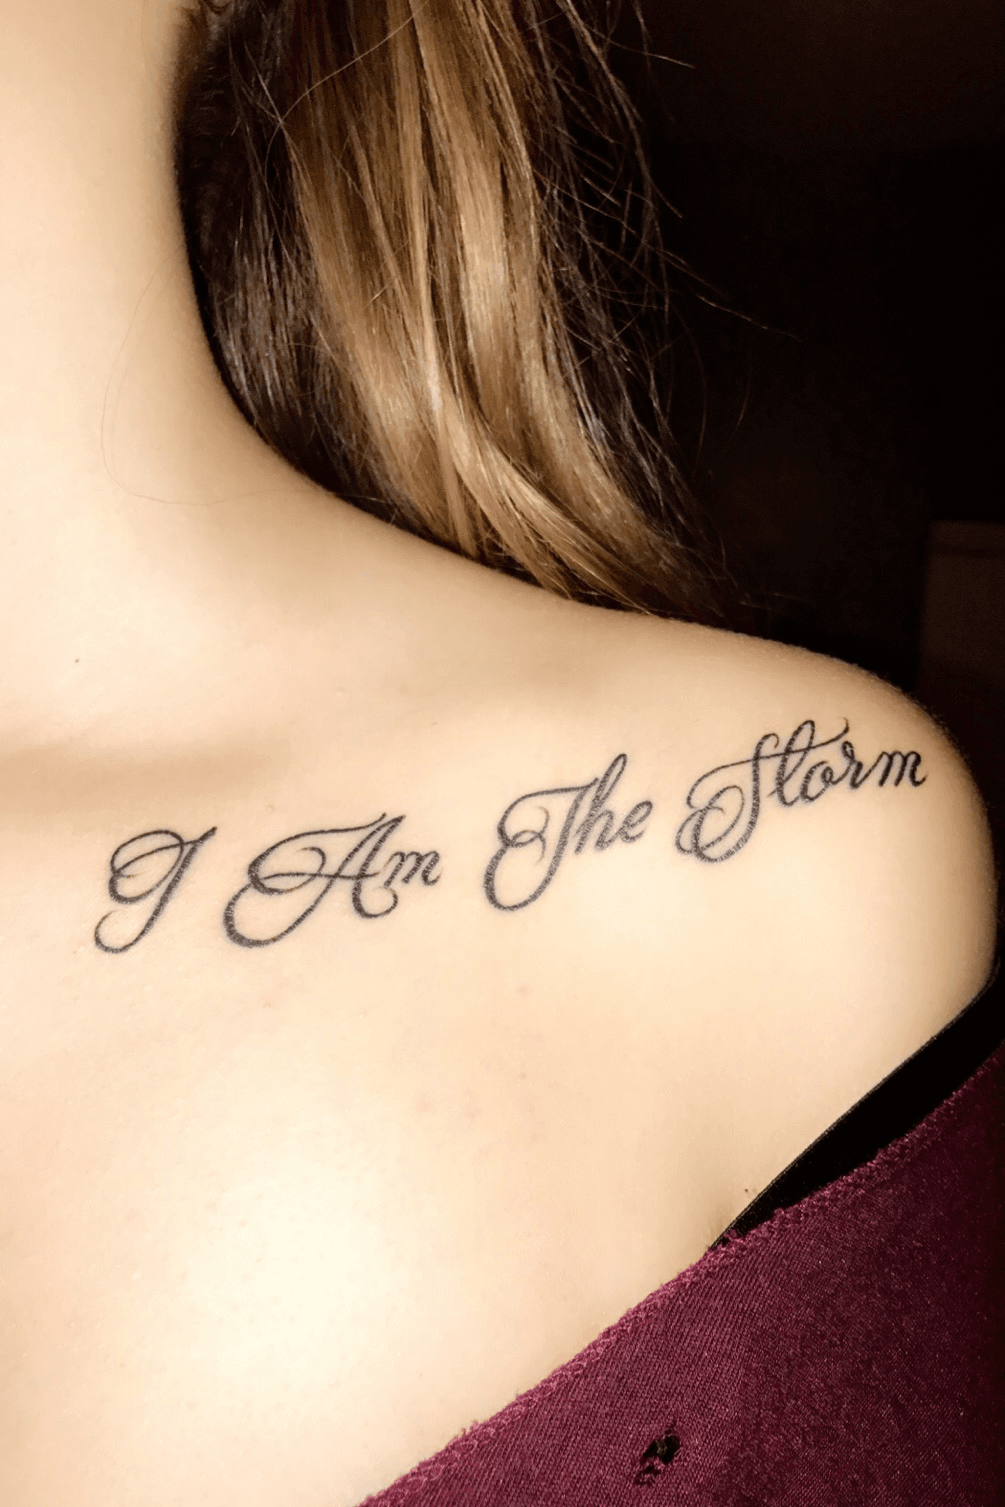 Female tattoos quote about strength to inspire you every single day